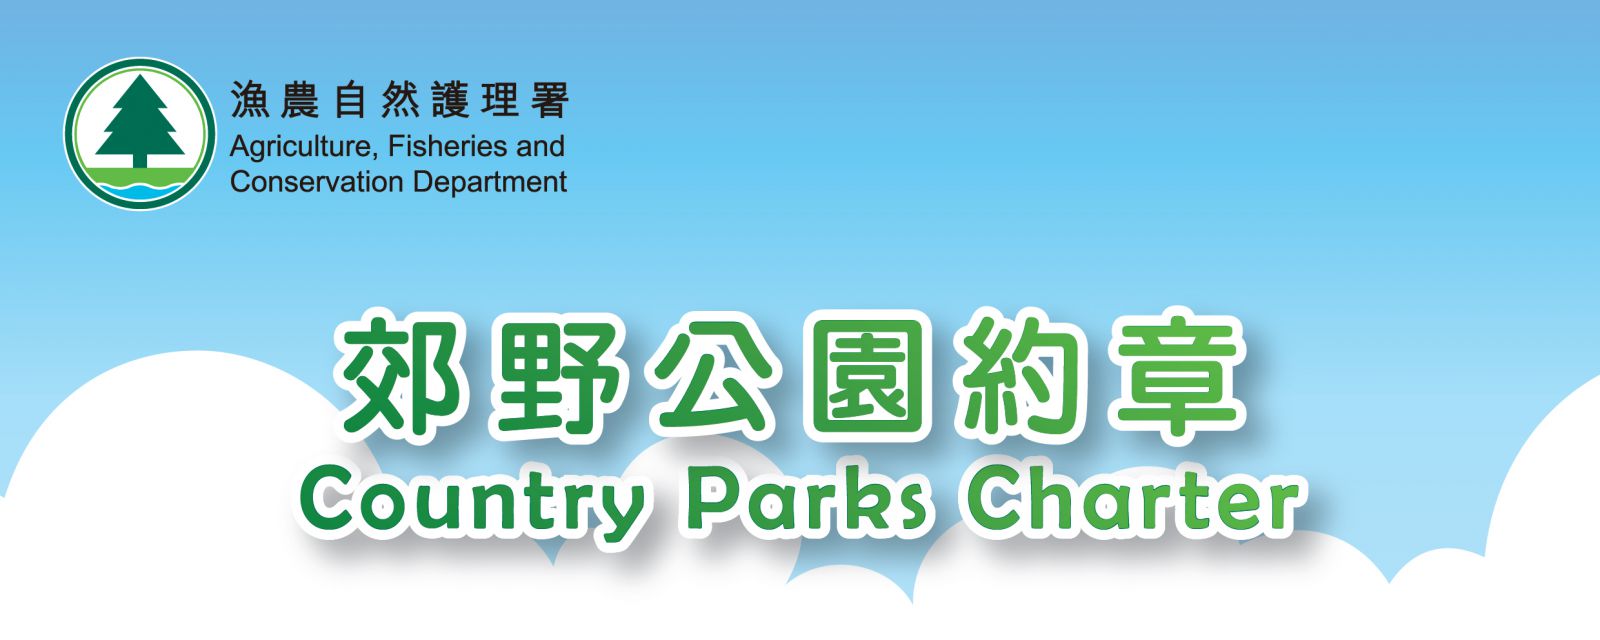 Country Parks Charter